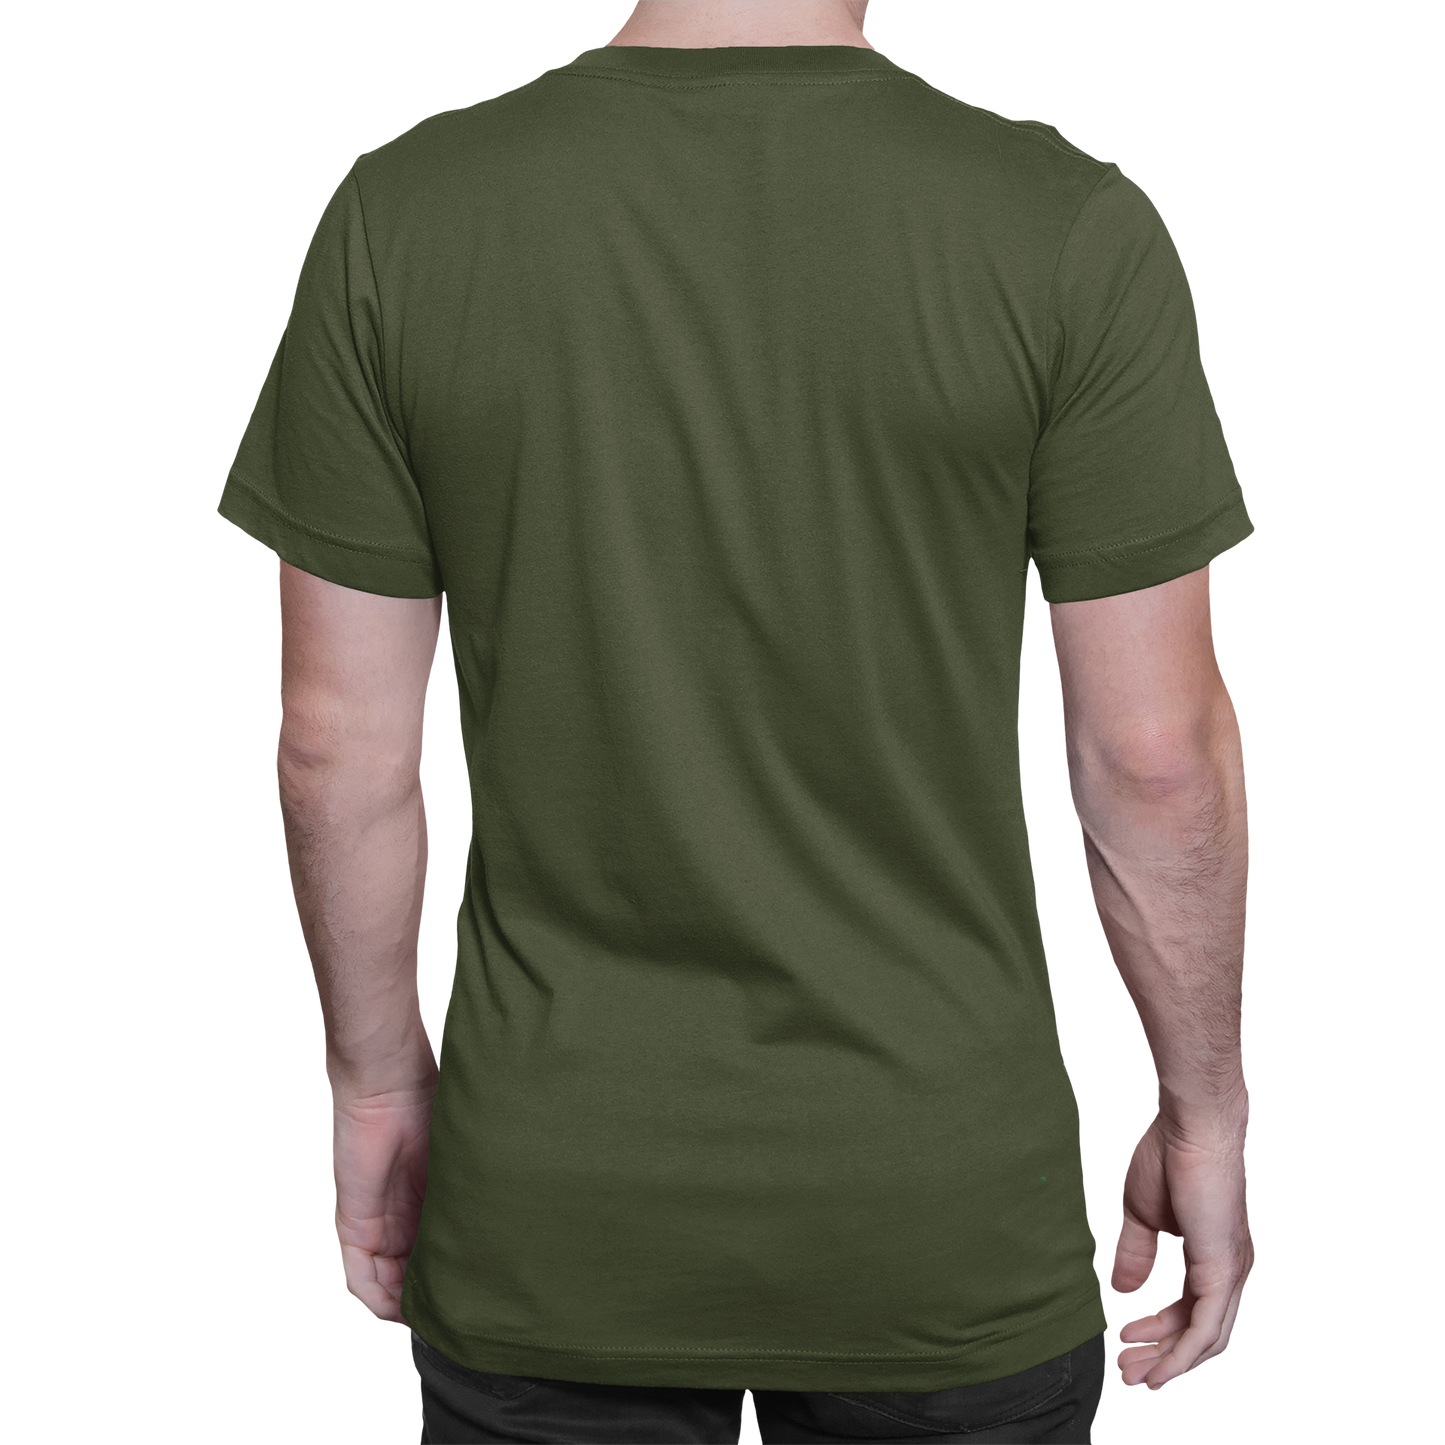 Think Outside The Box Green T-Shirt